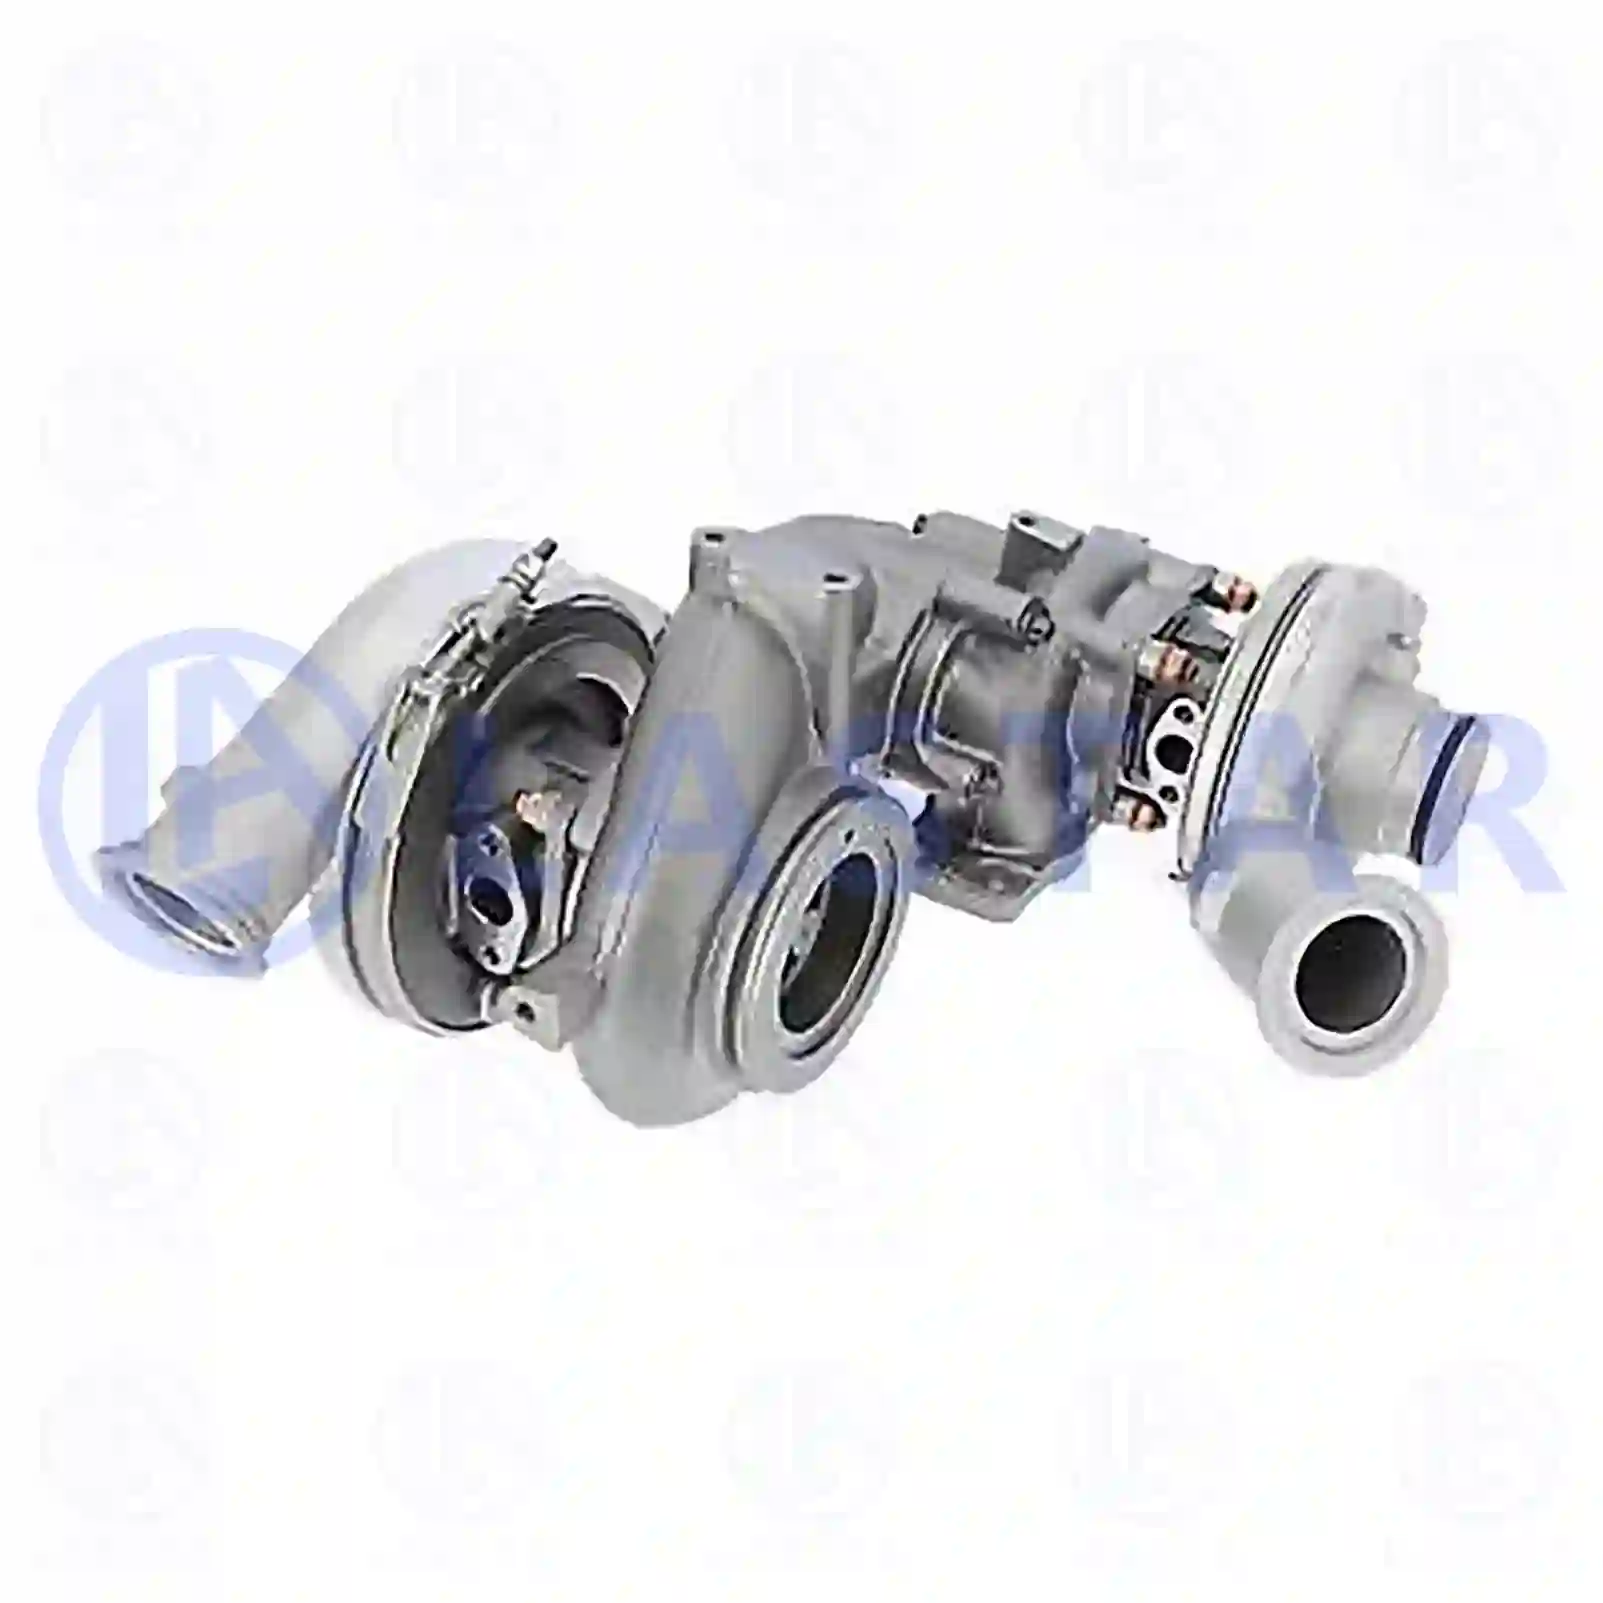 Turbocharger, reman. / without old core, 77700490, 51091007762, 51091007866, 51091017022, 51091017225 ||  77700490 Lastar Spare Part | Truck Spare Parts, Auotomotive Spare Parts Turbocharger, reman. / without old core, 77700490, 51091007762, 51091007866, 51091017022, 51091017225 ||  77700490 Lastar Spare Part | Truck Spare Parts, Auotomotive Spare Parts